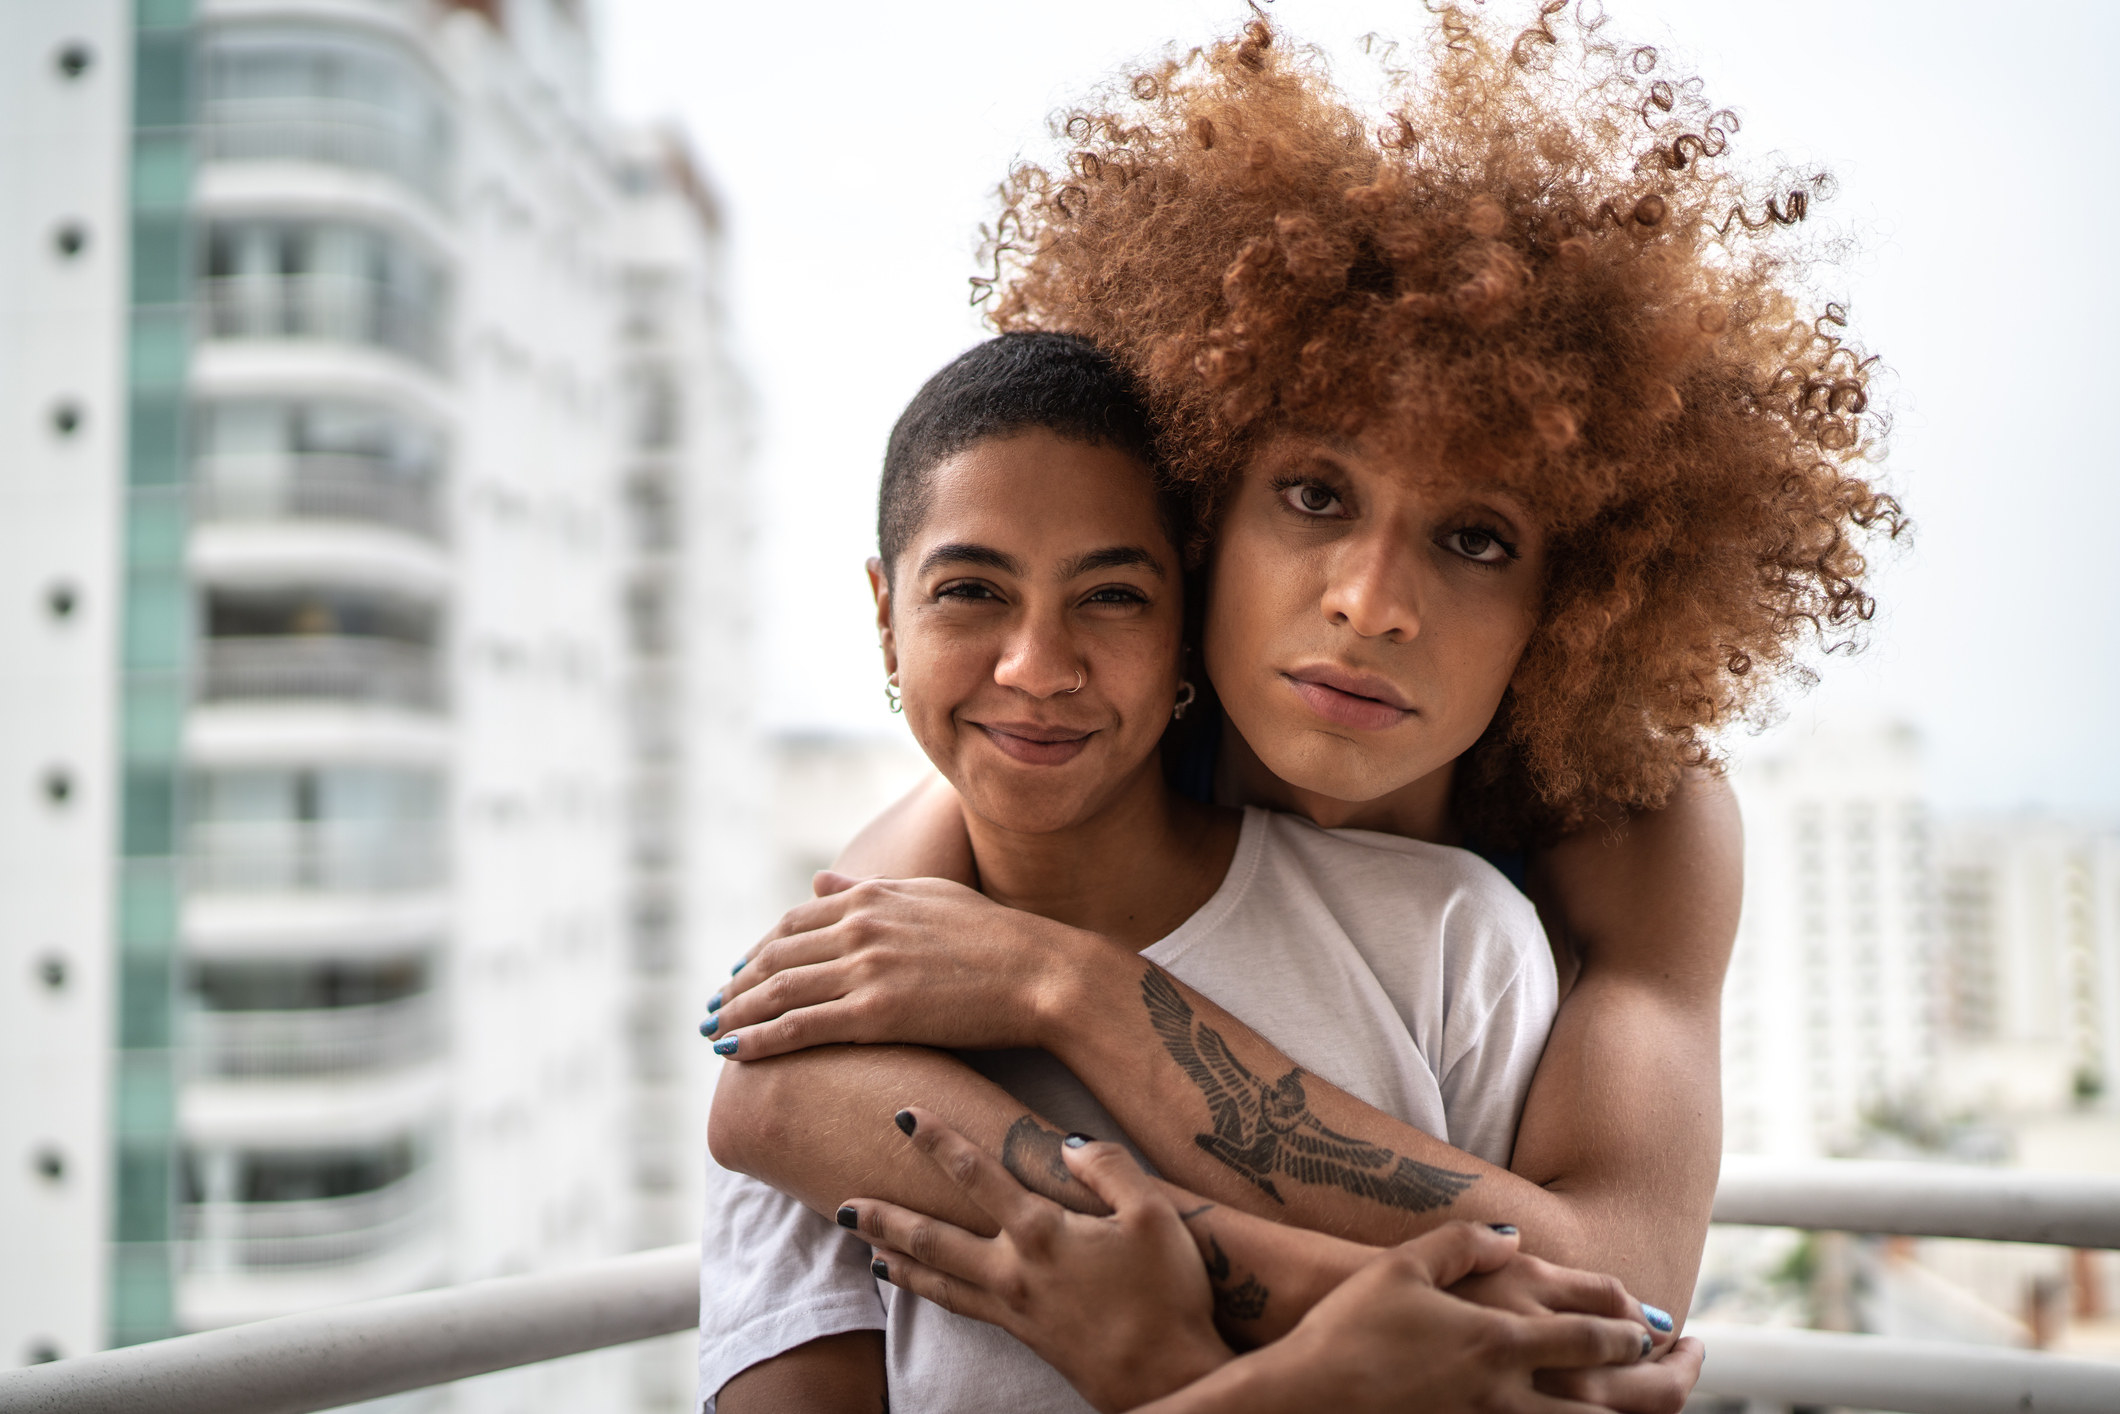 Portrait of a happy femme-presenting homosexual couple